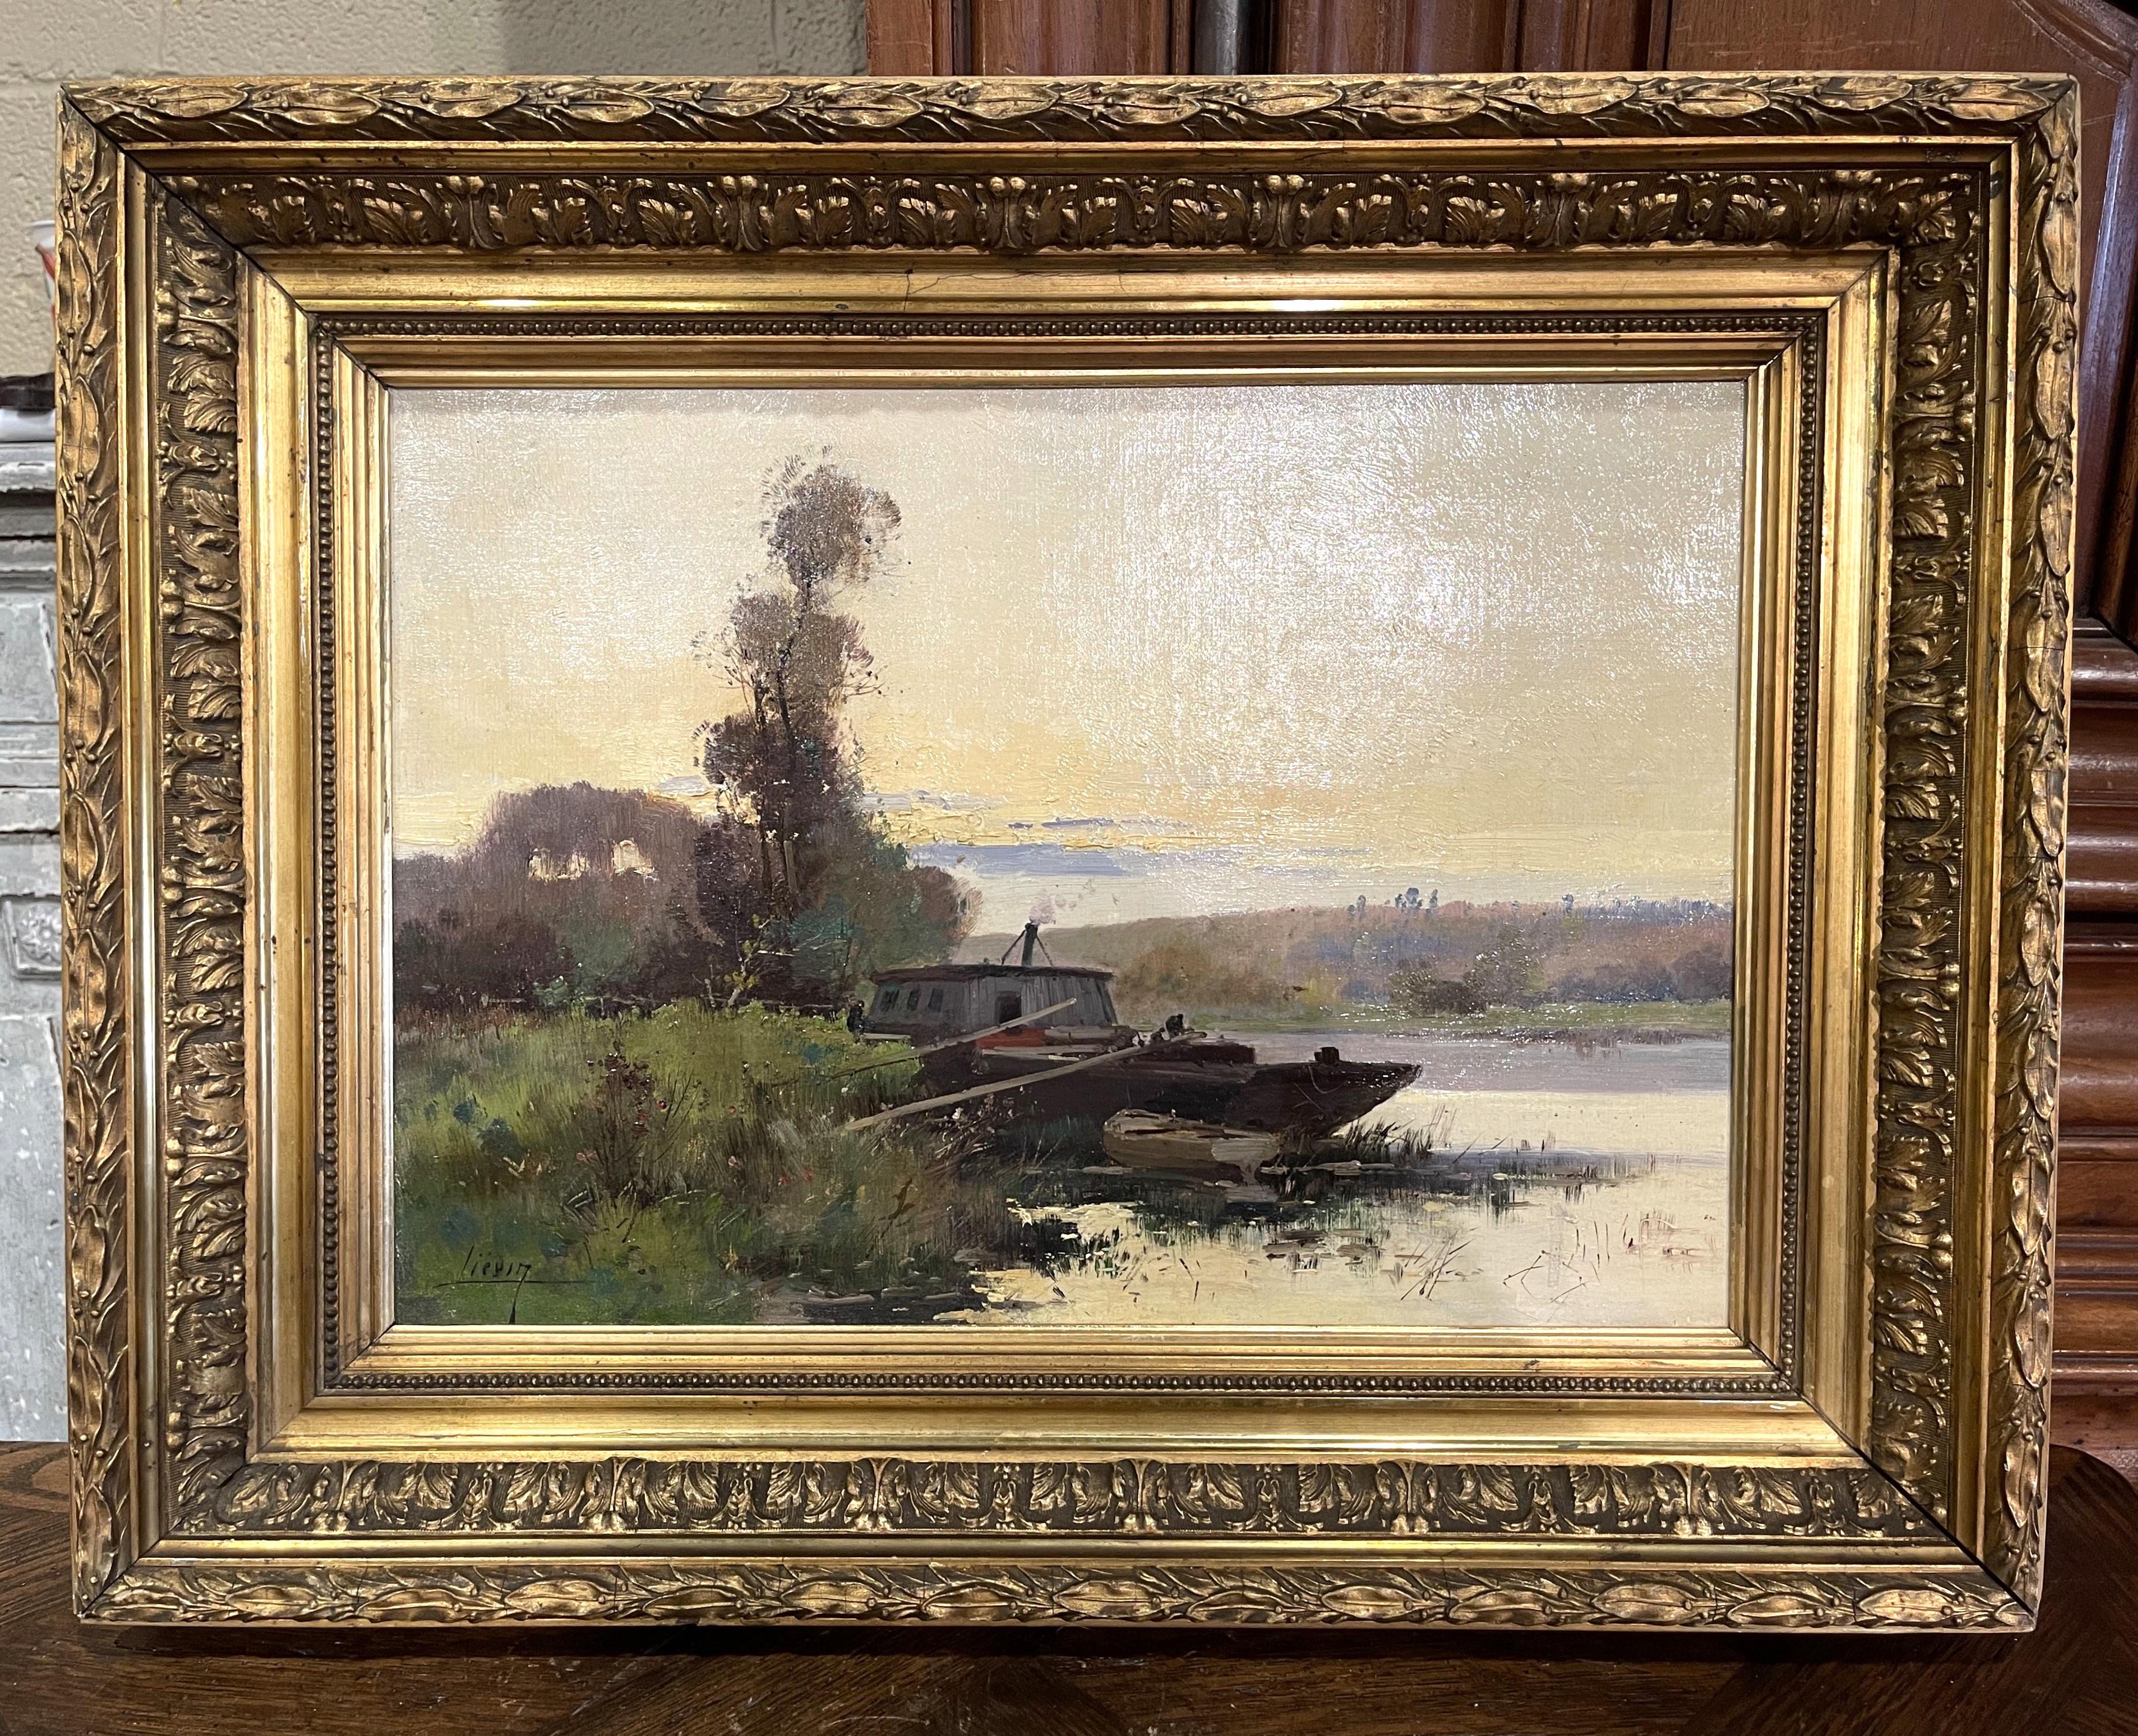 Canvas 19th Century Oil Painting in Carved Gilt Frame Signed Lievin for E Galien-Laloue